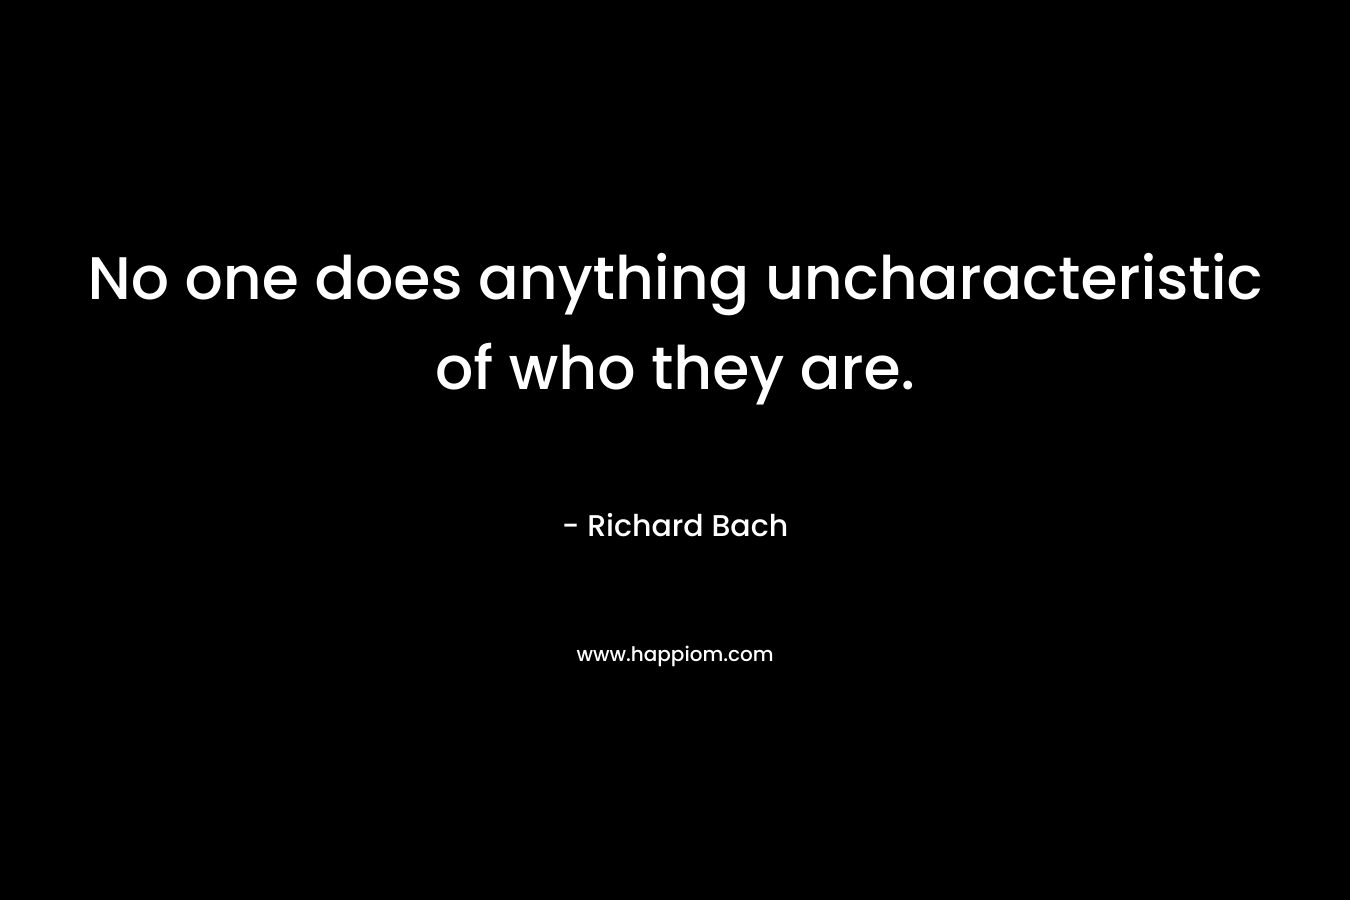 No one does anything uncharacteristic of who they are.